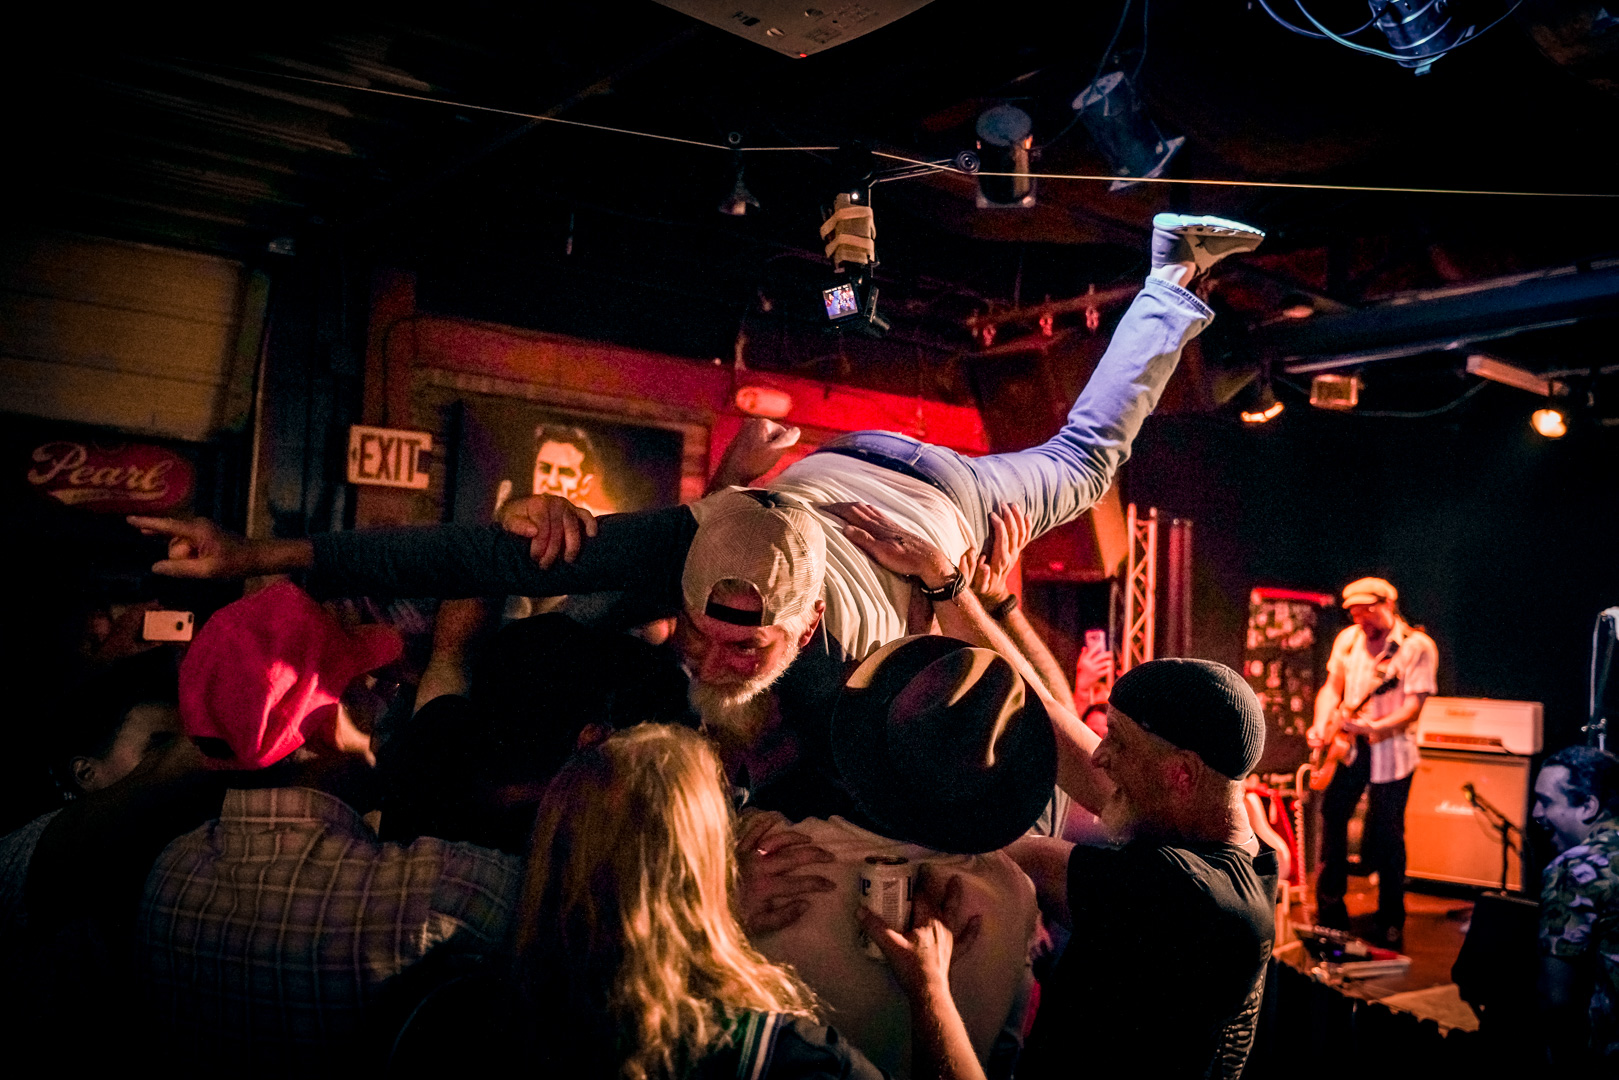 A man crowd surfing in a small crowd